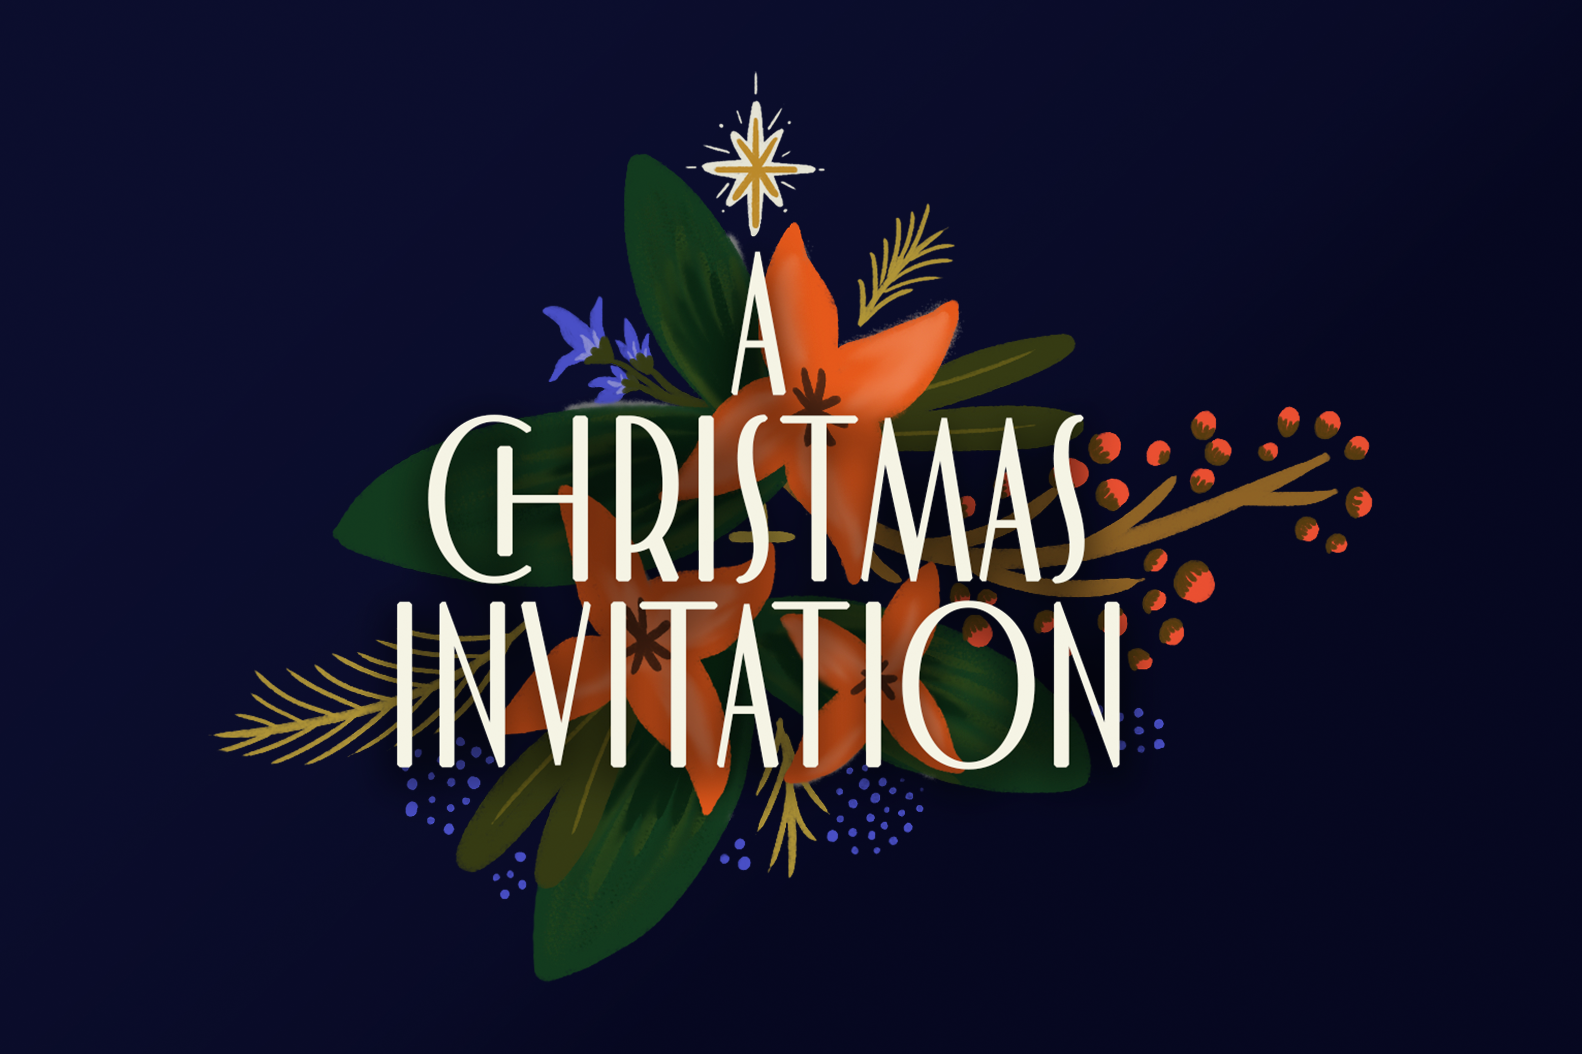 A Christmas Invitation - 1582 featured